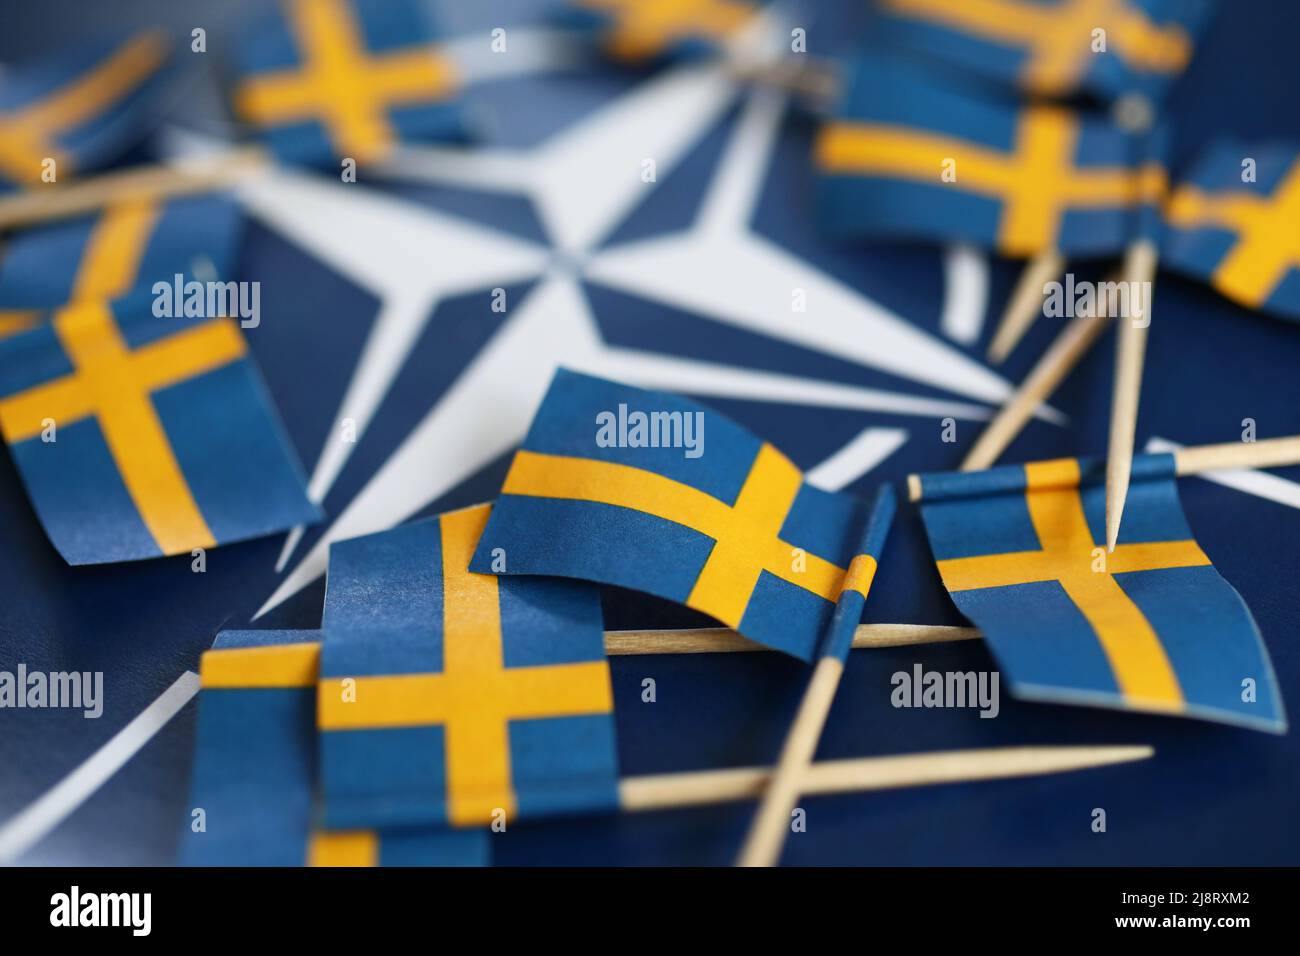 The leaders of Finland and Sweden have confirmed they intend to join Nato, signifying a historic Nordic policy shift triggered by Russia’s invasion of Ukraine that will redraw the security map of Europe. Stock Photo